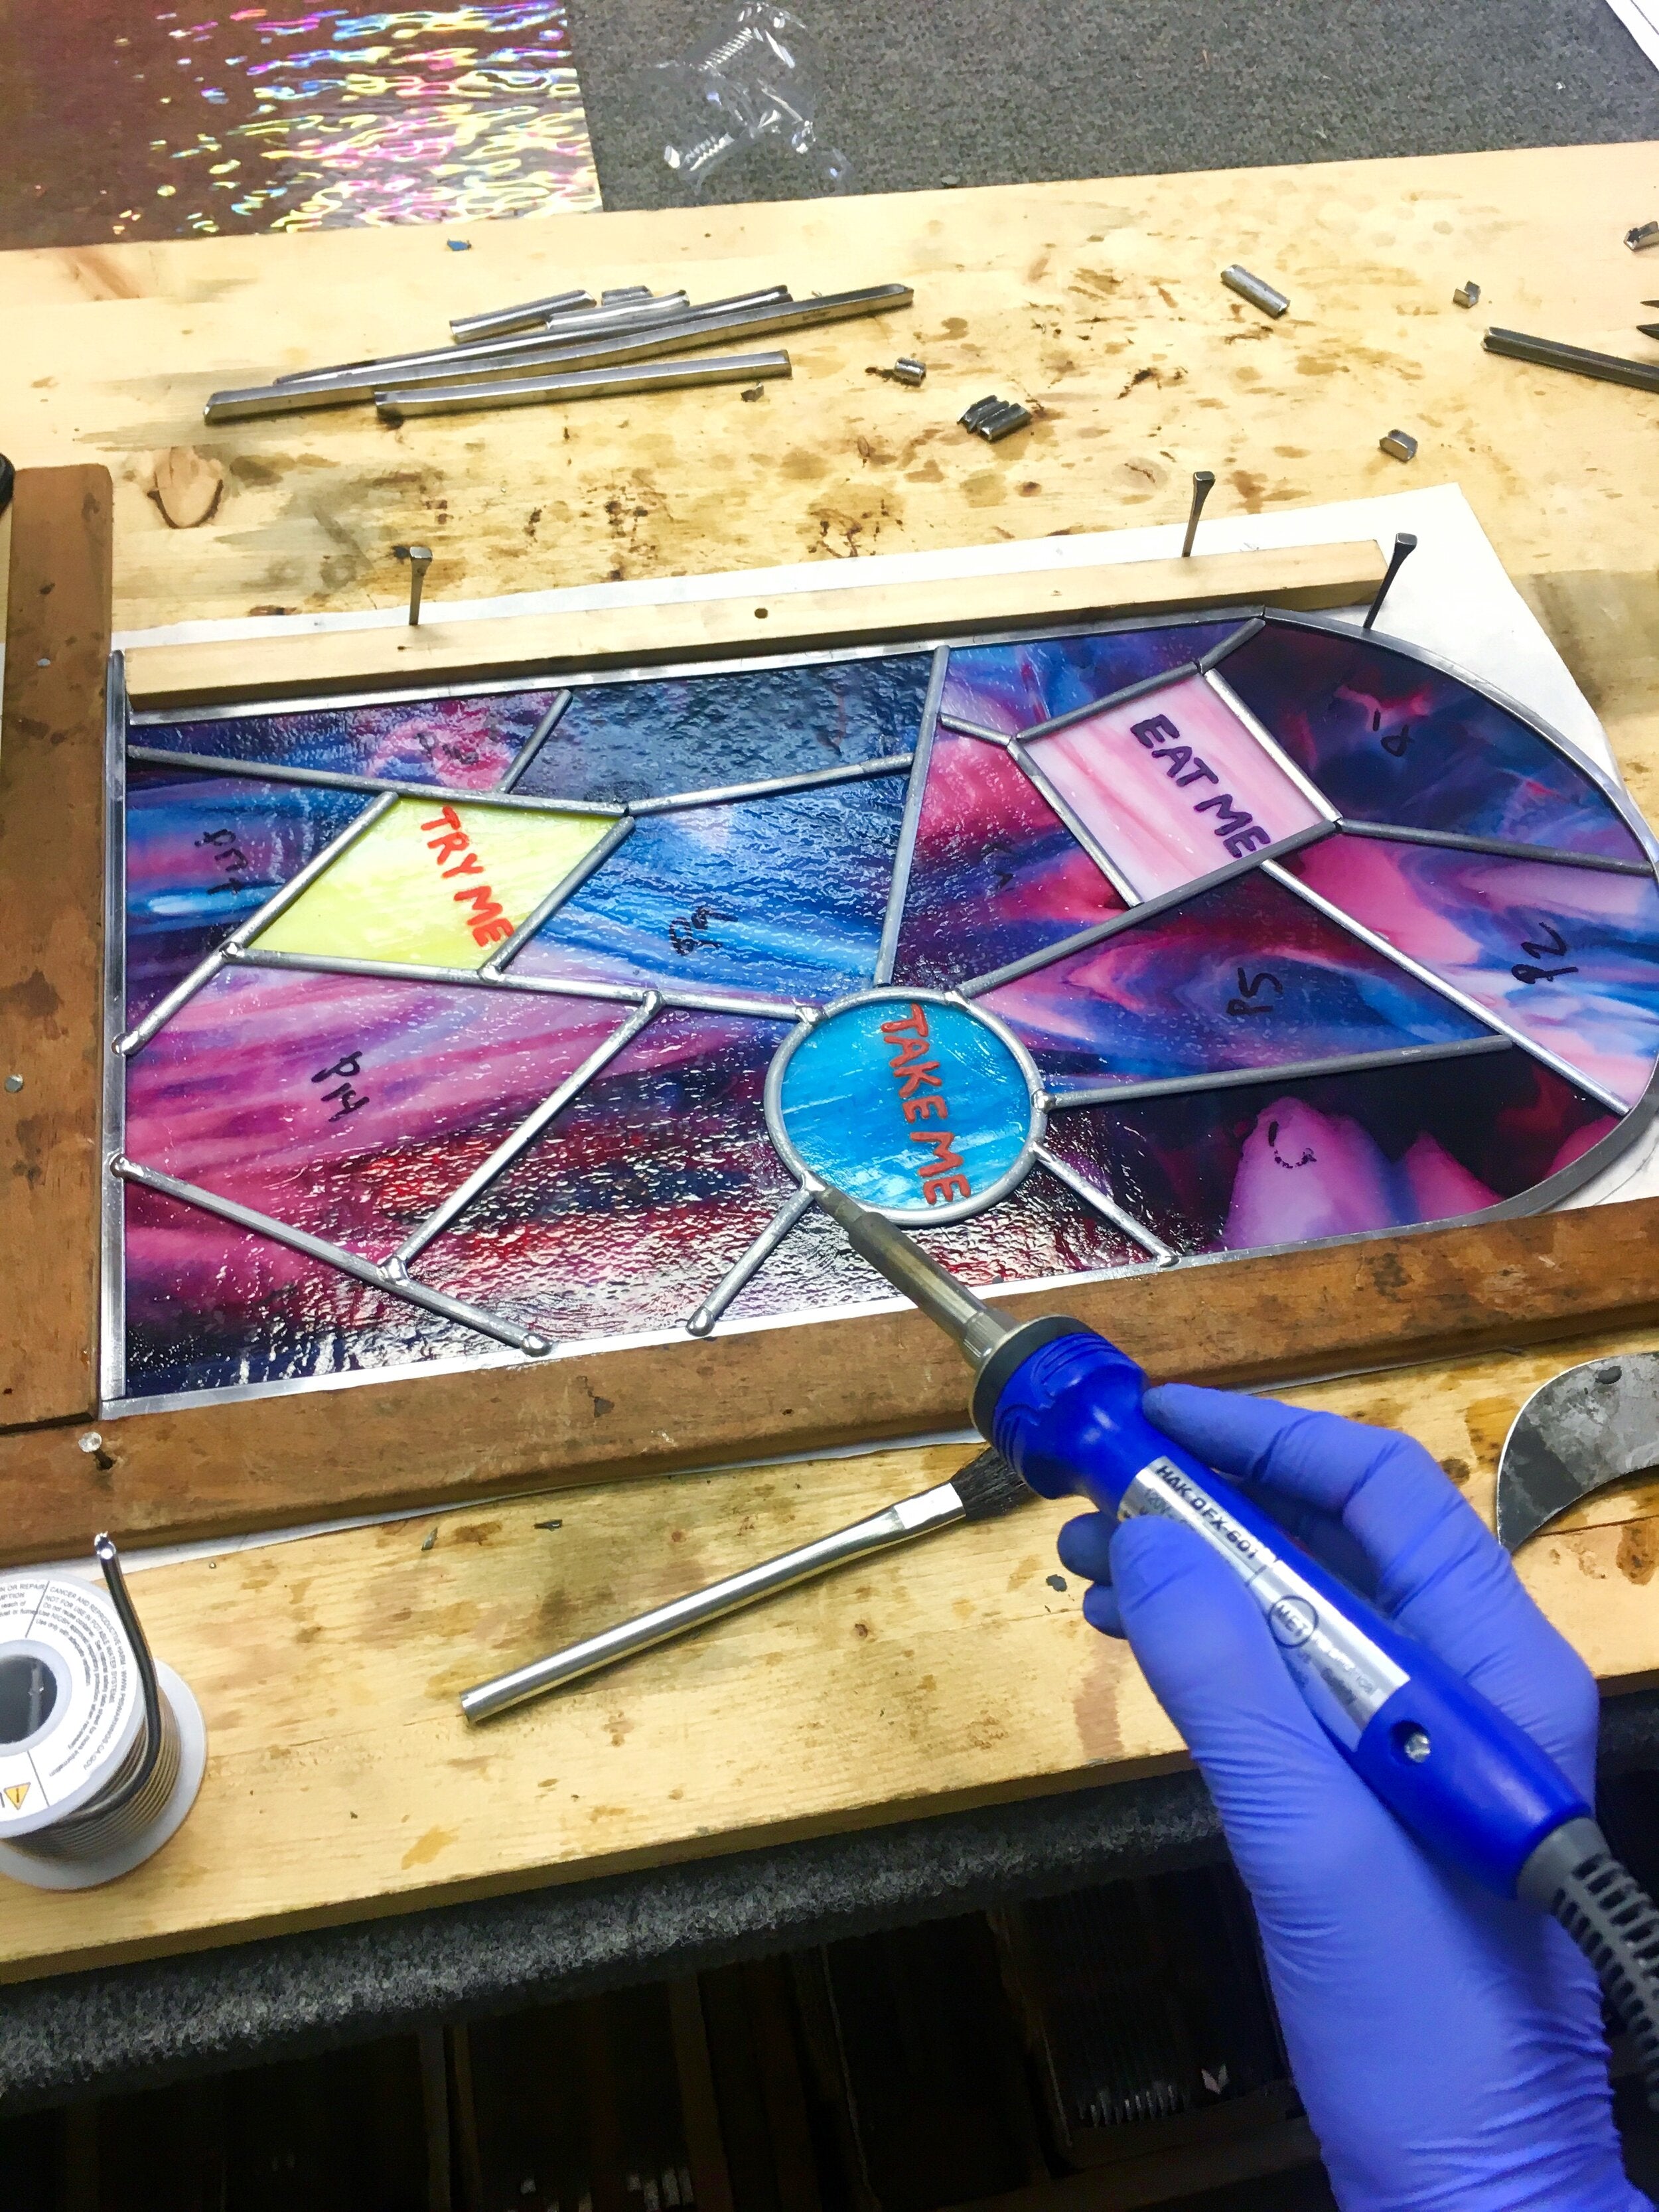 How to make a beveled stained glass panel the easy way - B+C Guides